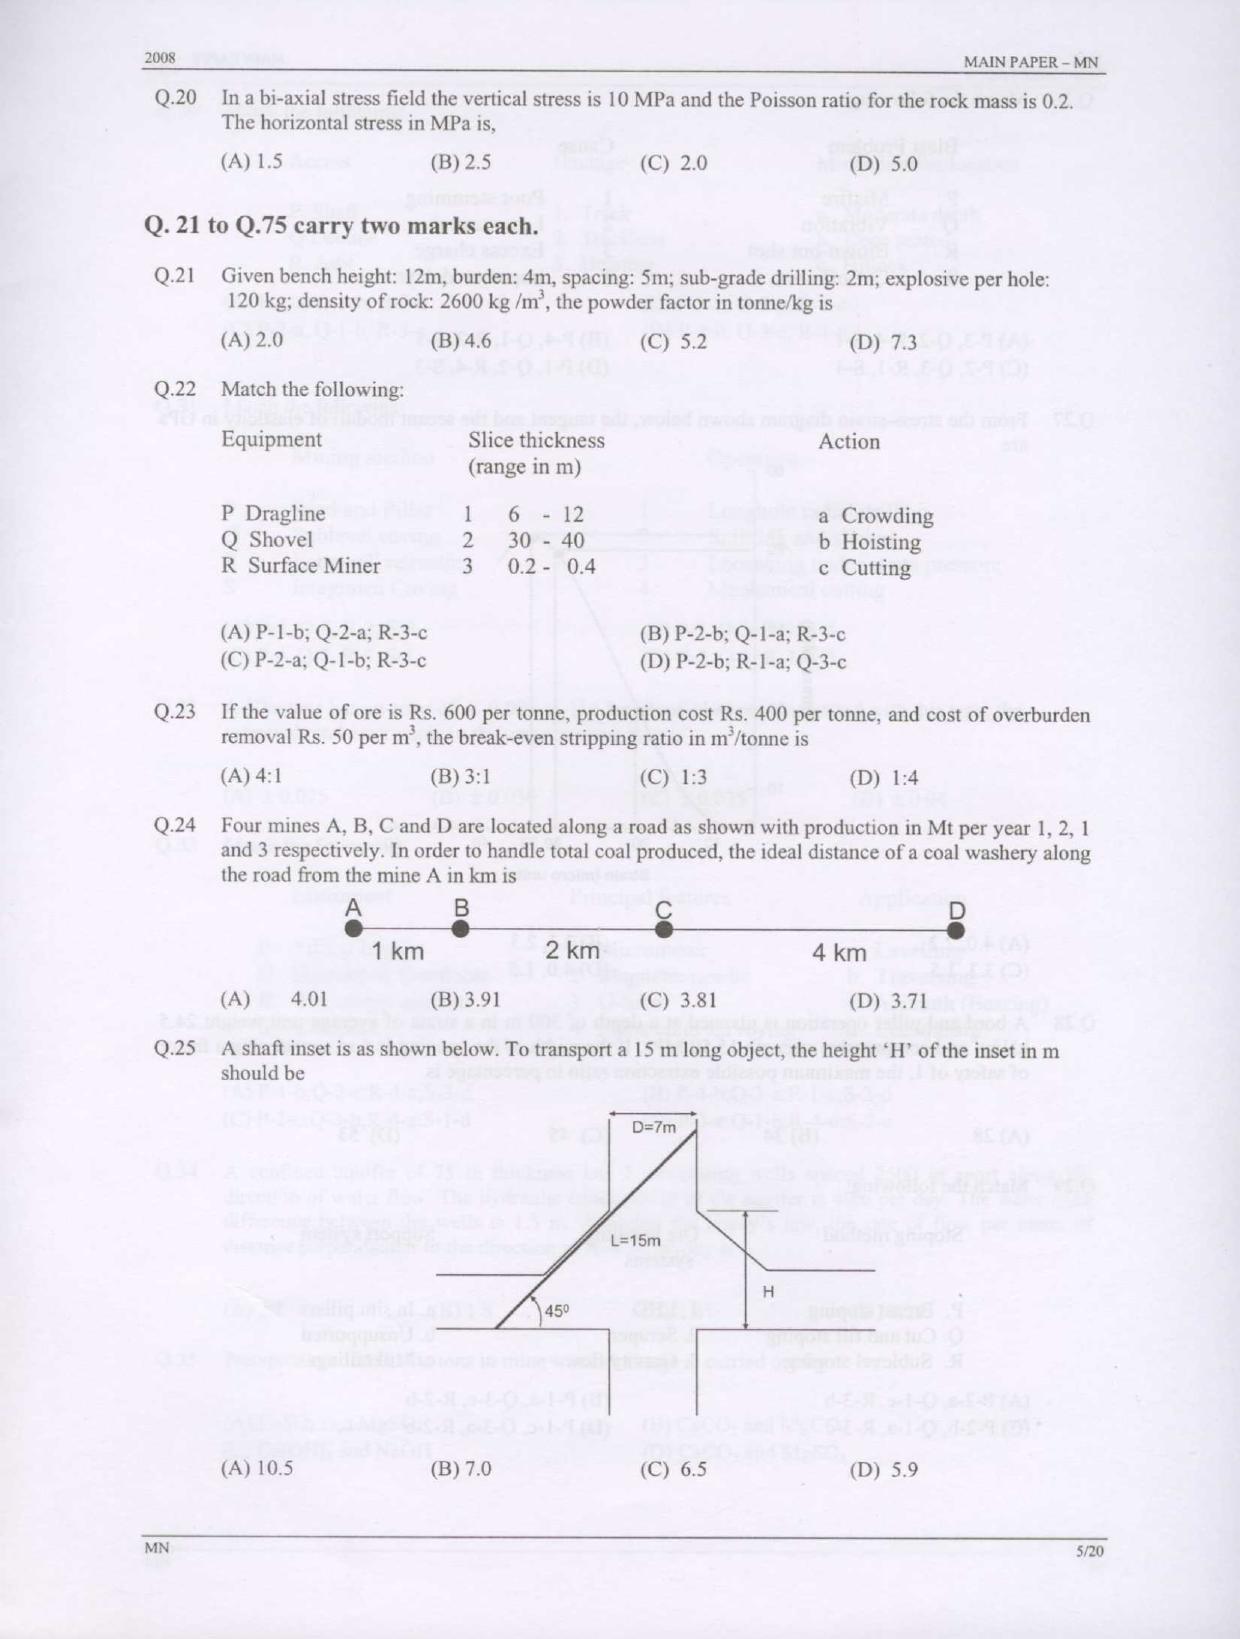 GATE 2008 Mining Engineering (MN) Question Paper with Answer Key - Page 5